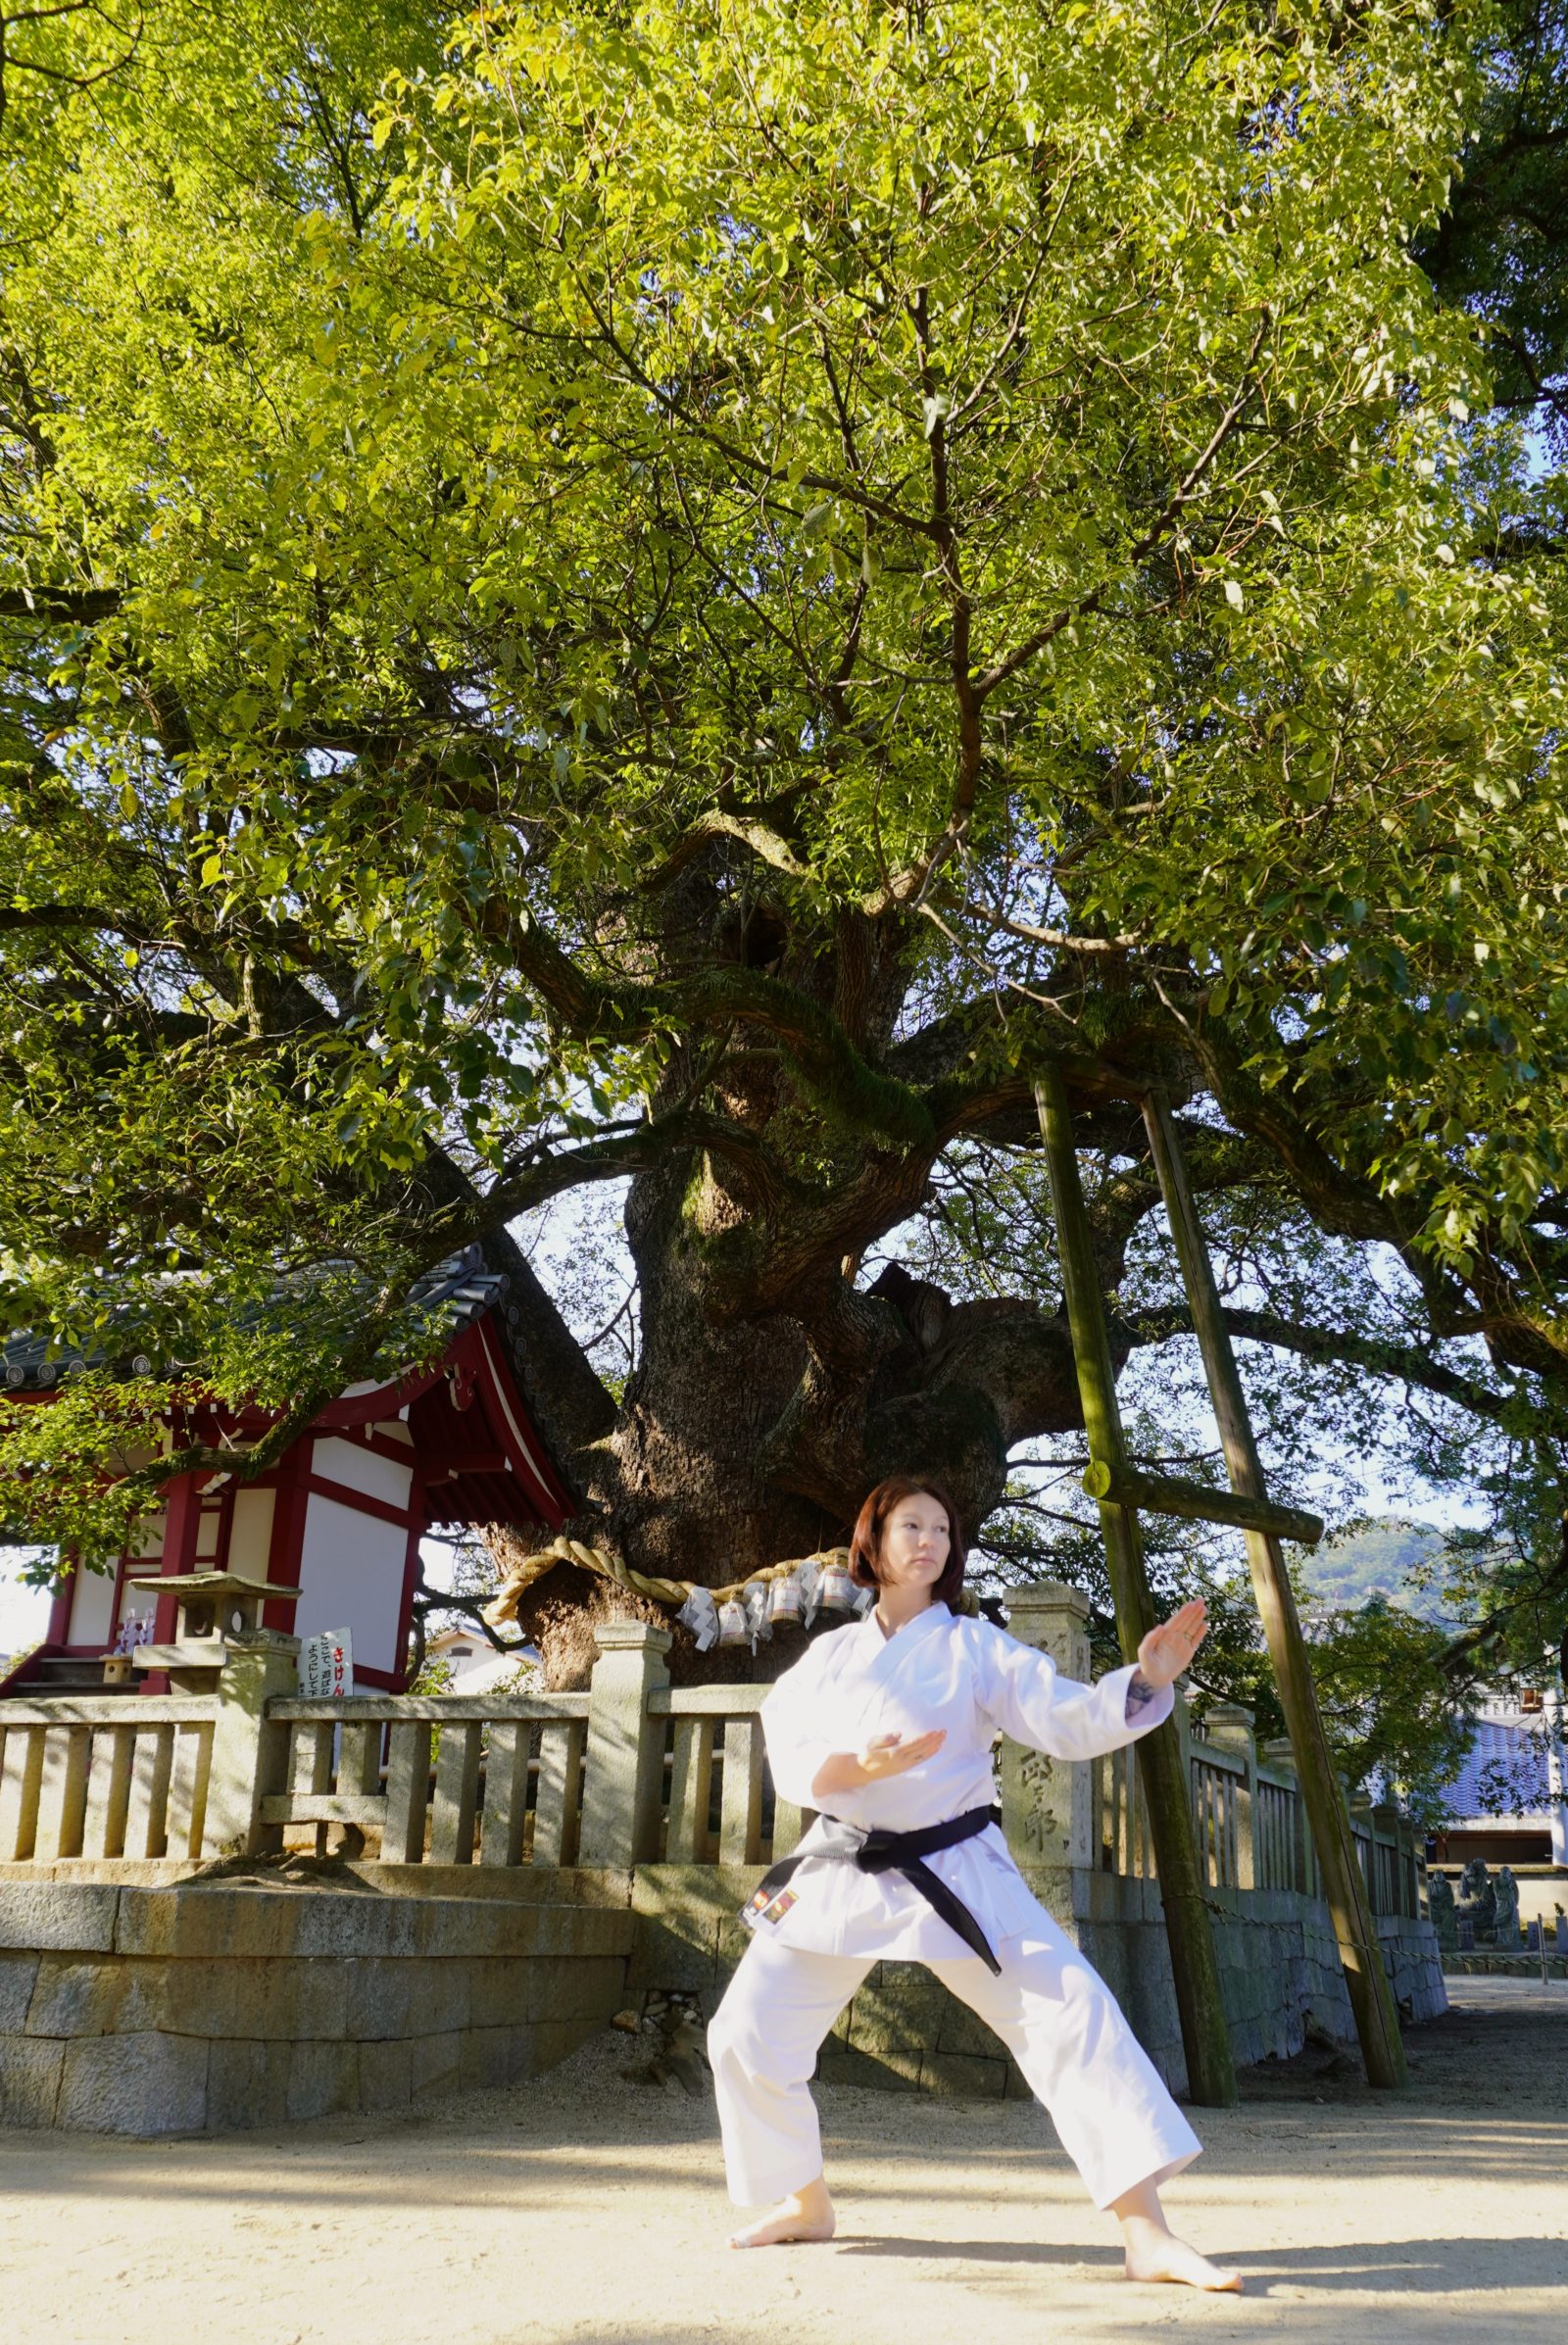 Both of the two camphor trees, located beside Minamidaimon Kita and Goshamei Shrine, are said to be 1,000 years old, and are large trees reminiscent of the time when Daishi was a child and when Zentsuji was founded. It has been designated as a natural monument in Kagawa Prefecture as "Great Gus in the precincts of Zentsuji Temple".